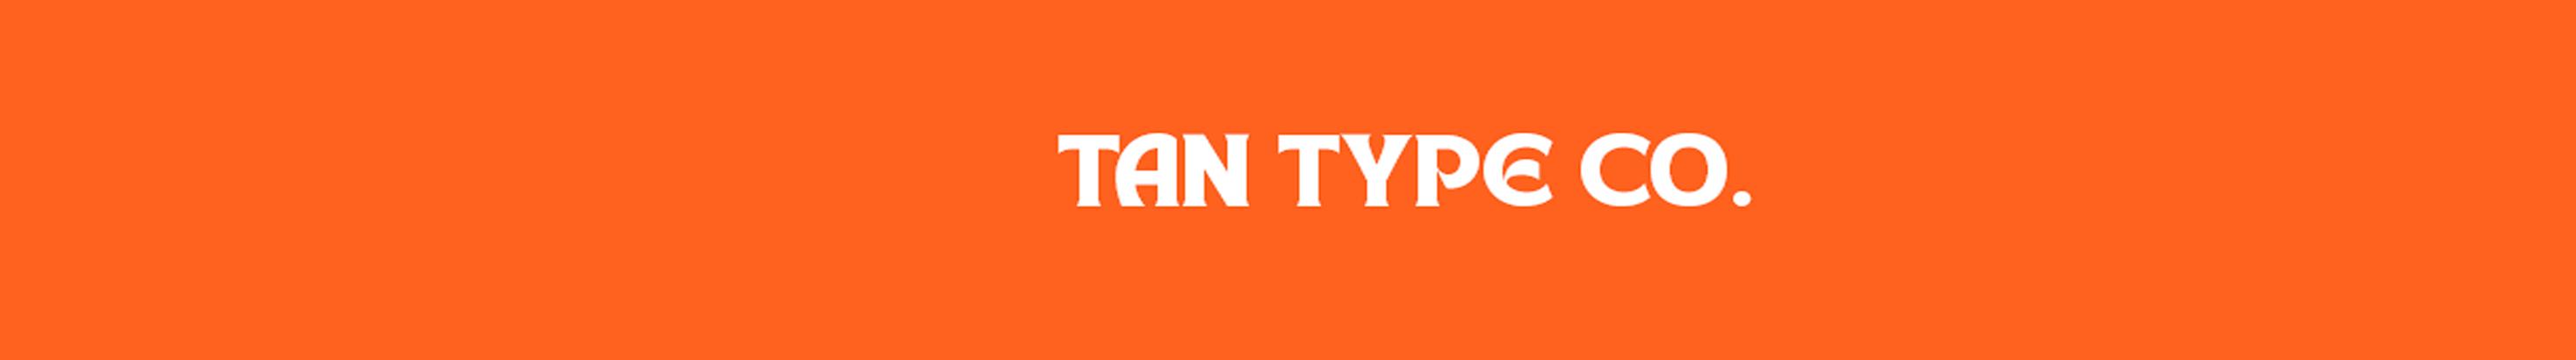 TANTYPE CO's profile banner